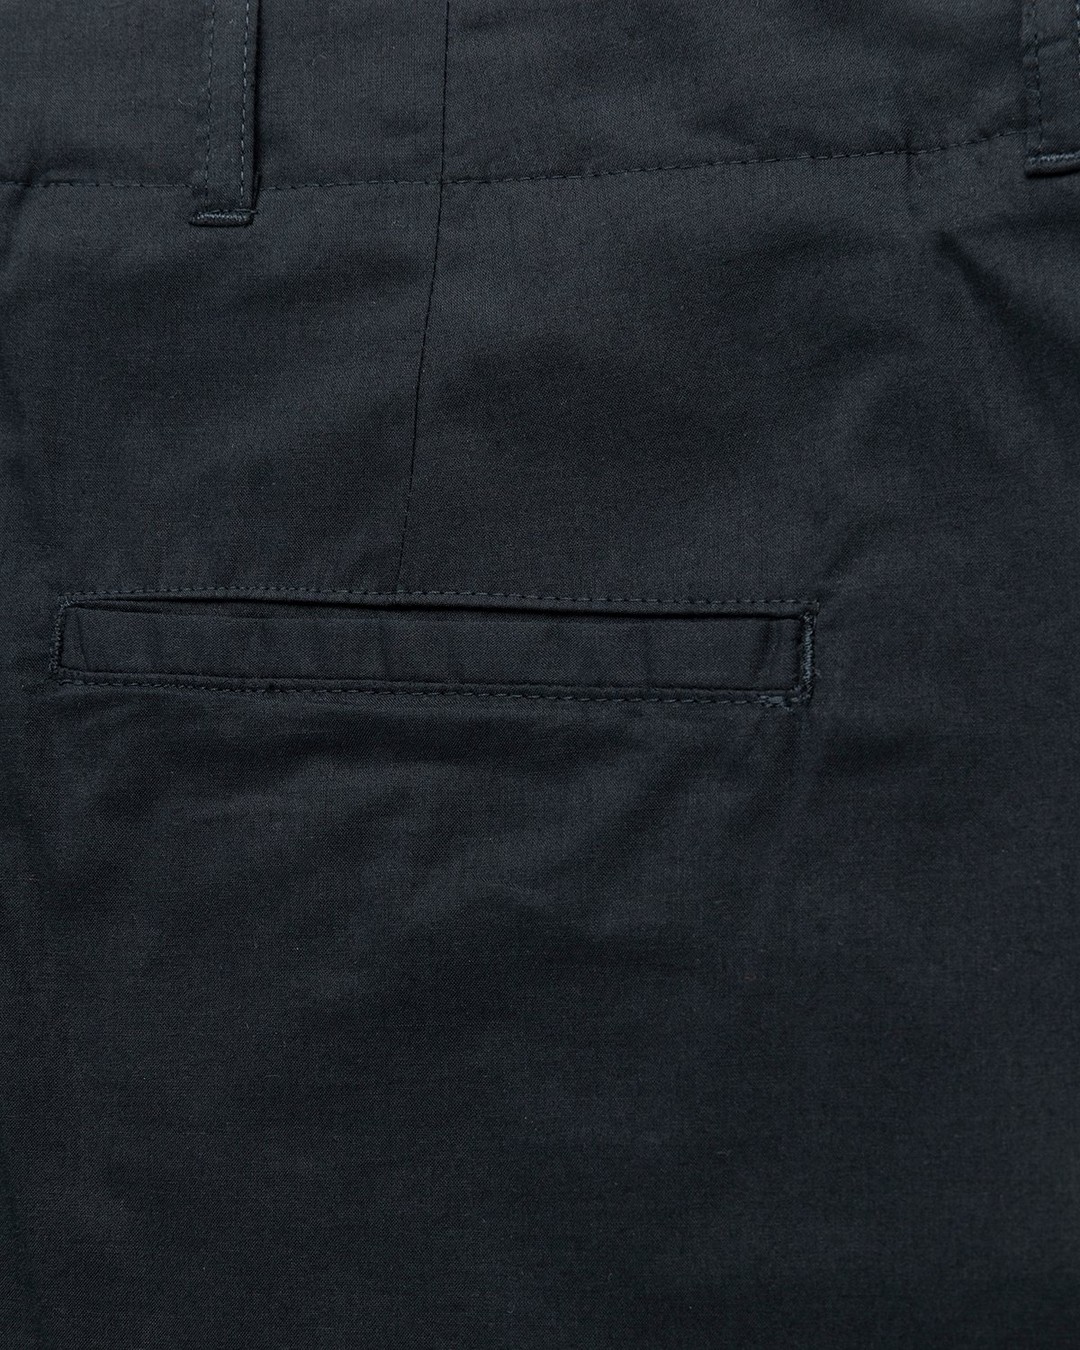 Our Legacy – Borrowed Chino Black Voile - Pants - Black - Image 4